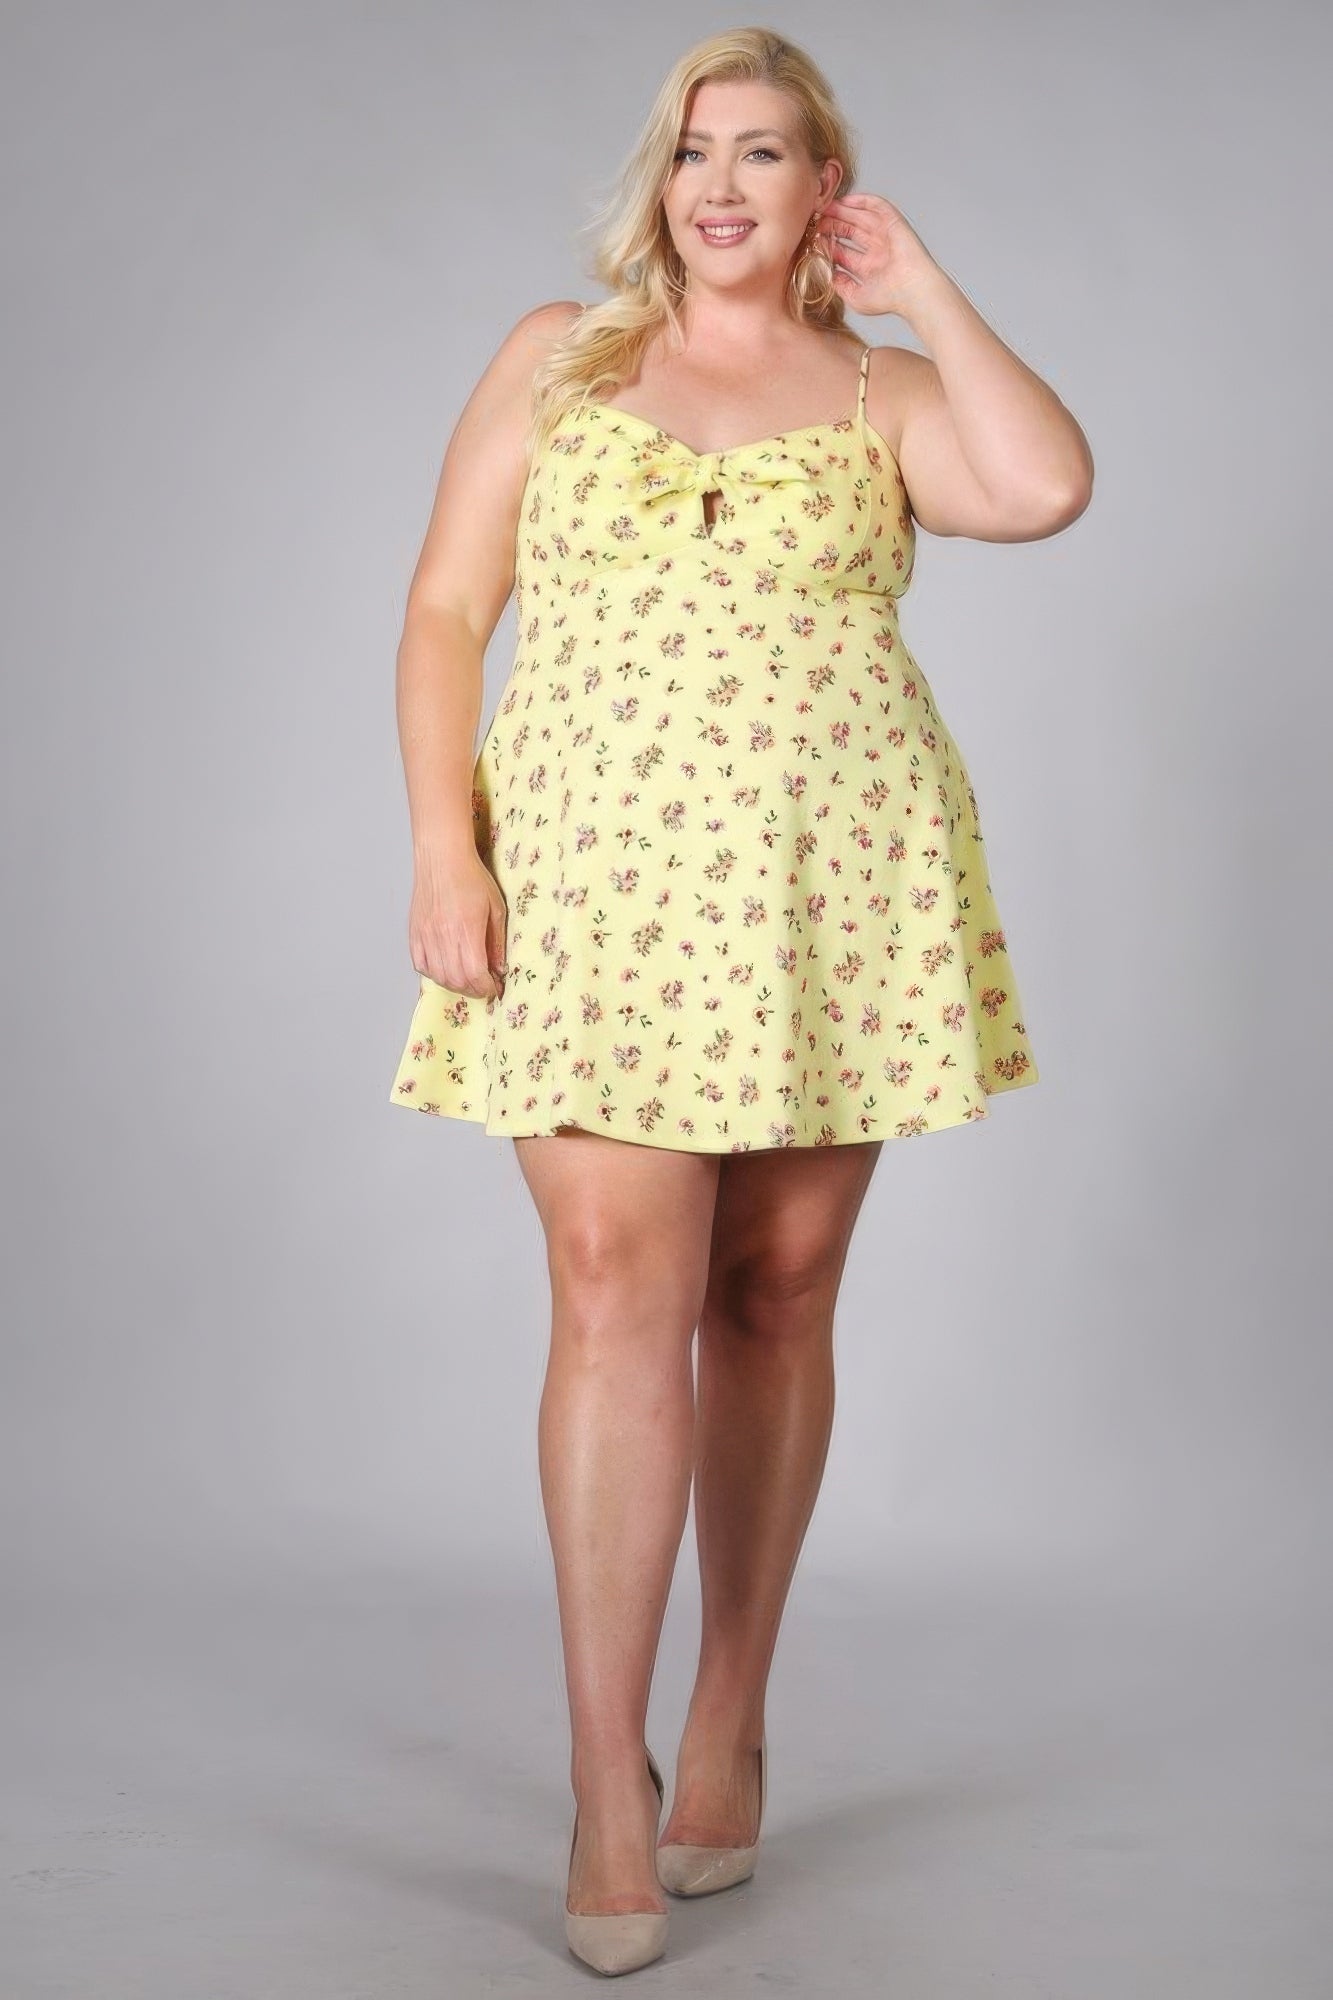 Voluptuous (+) Fit And Flare Floral Dress for Plus Size Women